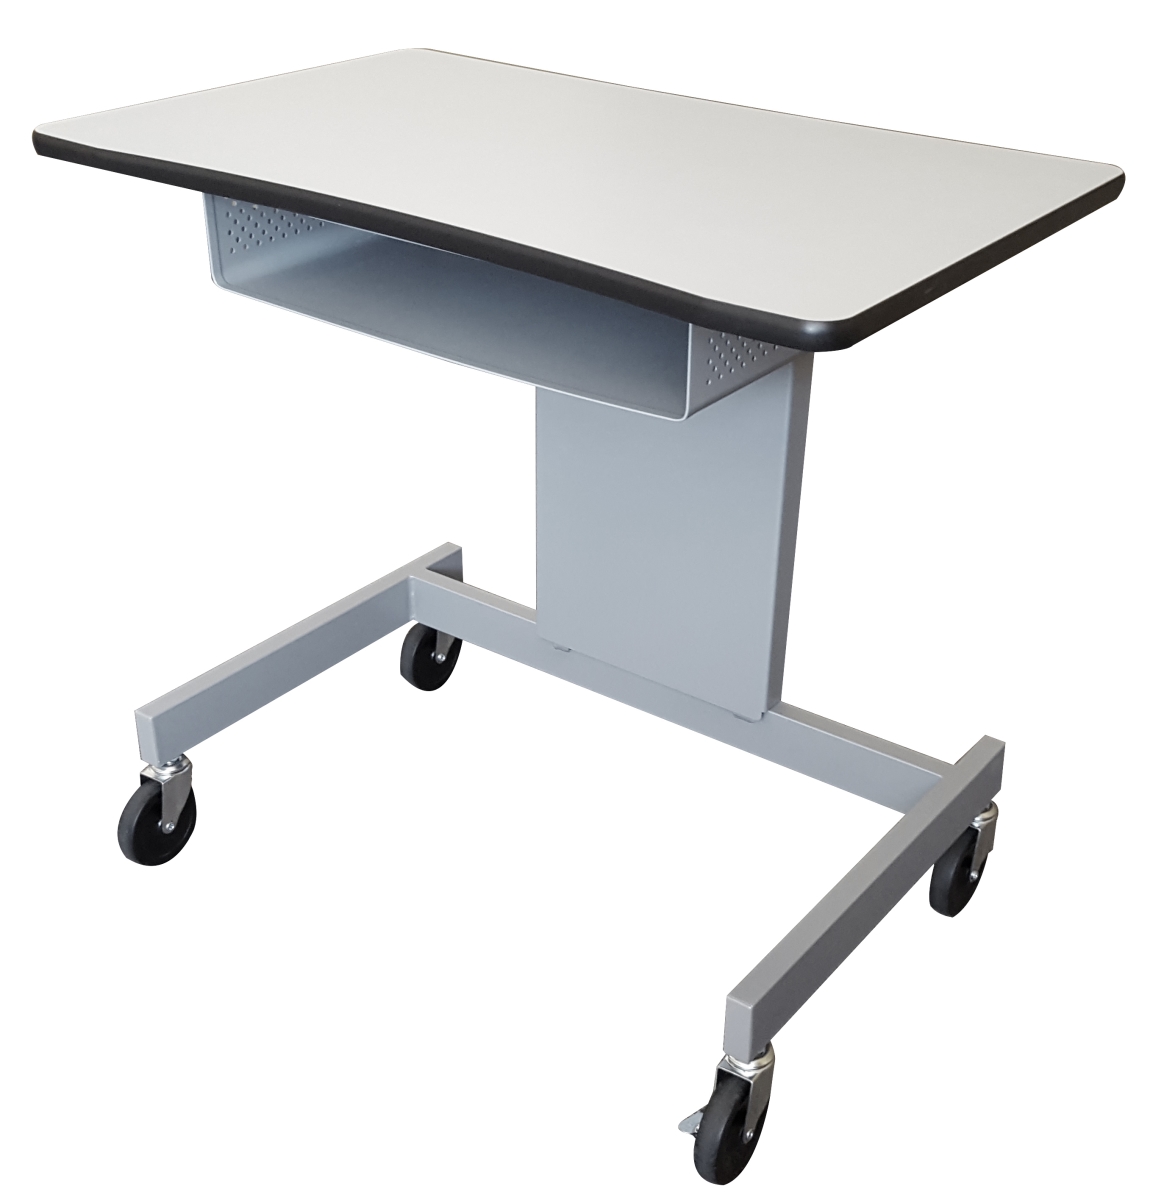 Amwd3220br-plst-c22 32 In. W Ergonomic Adjustable Height Mobile Workstation With Storage Tray, Gray & Silver